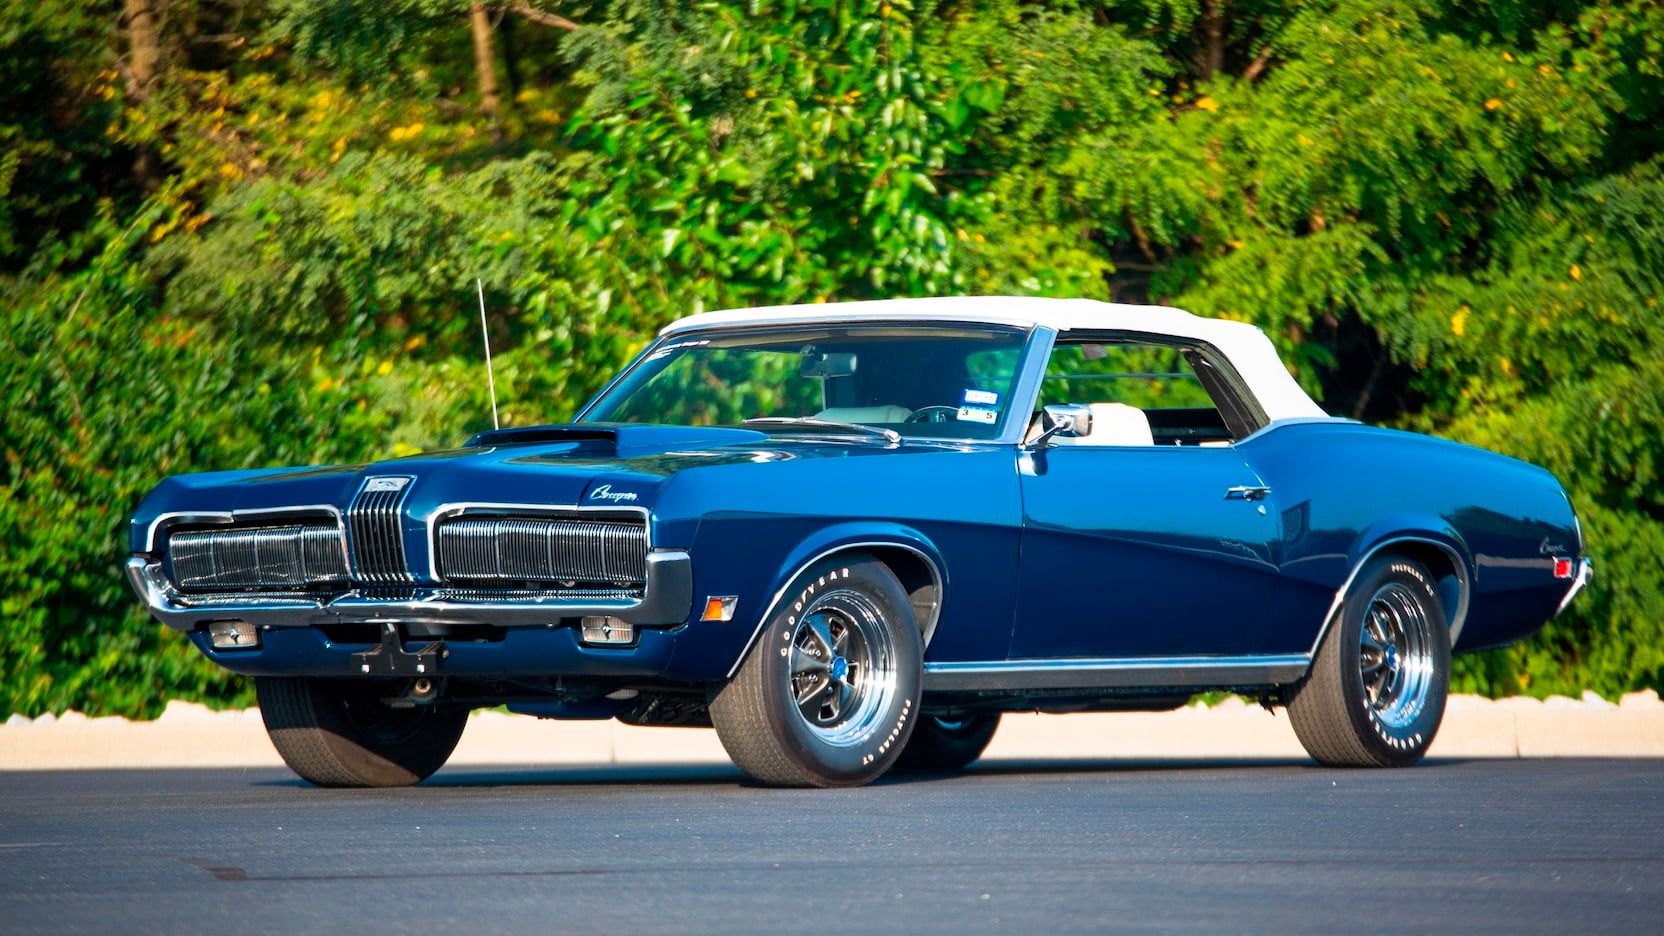 1970 Mercury Cougar XR7 on the road